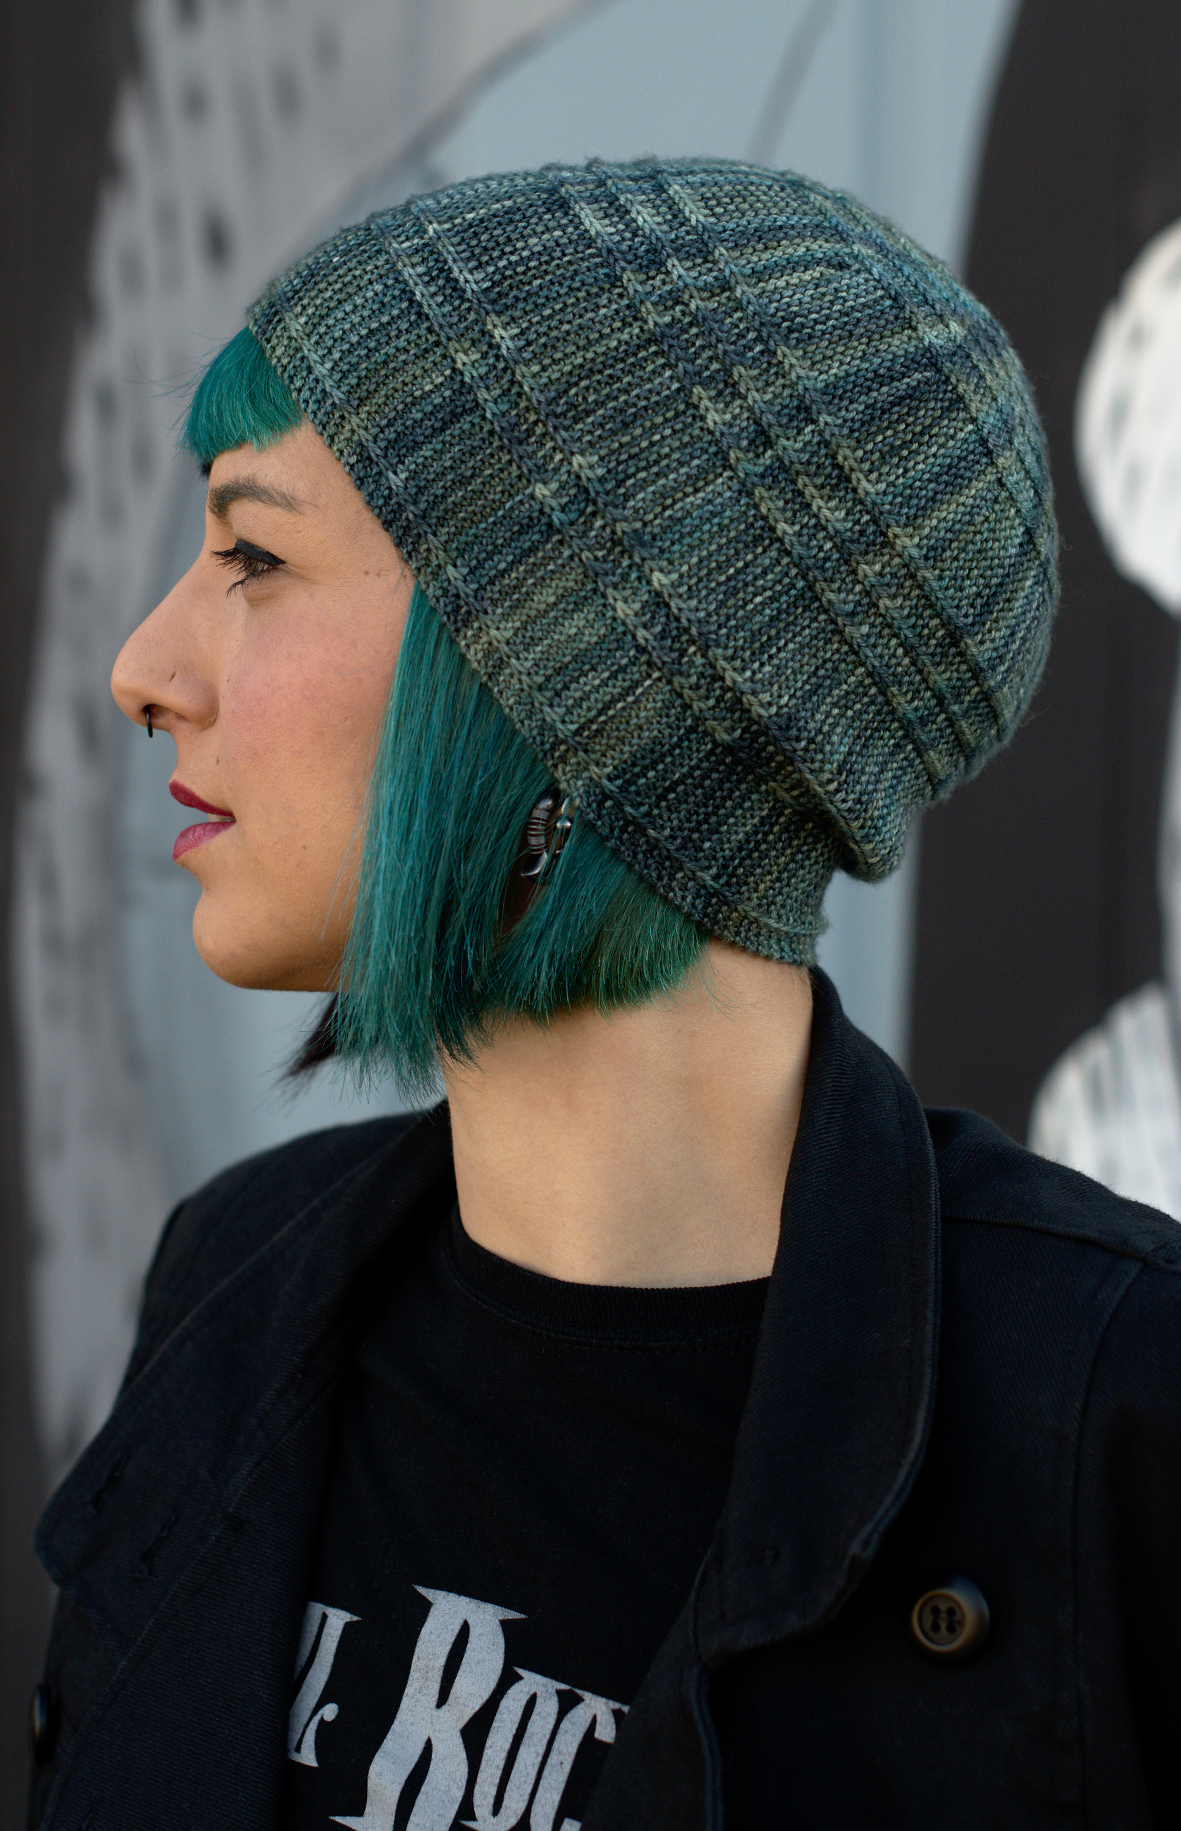 Circled 2 sideways knit Hat with fibonacci sequence of concentric rings